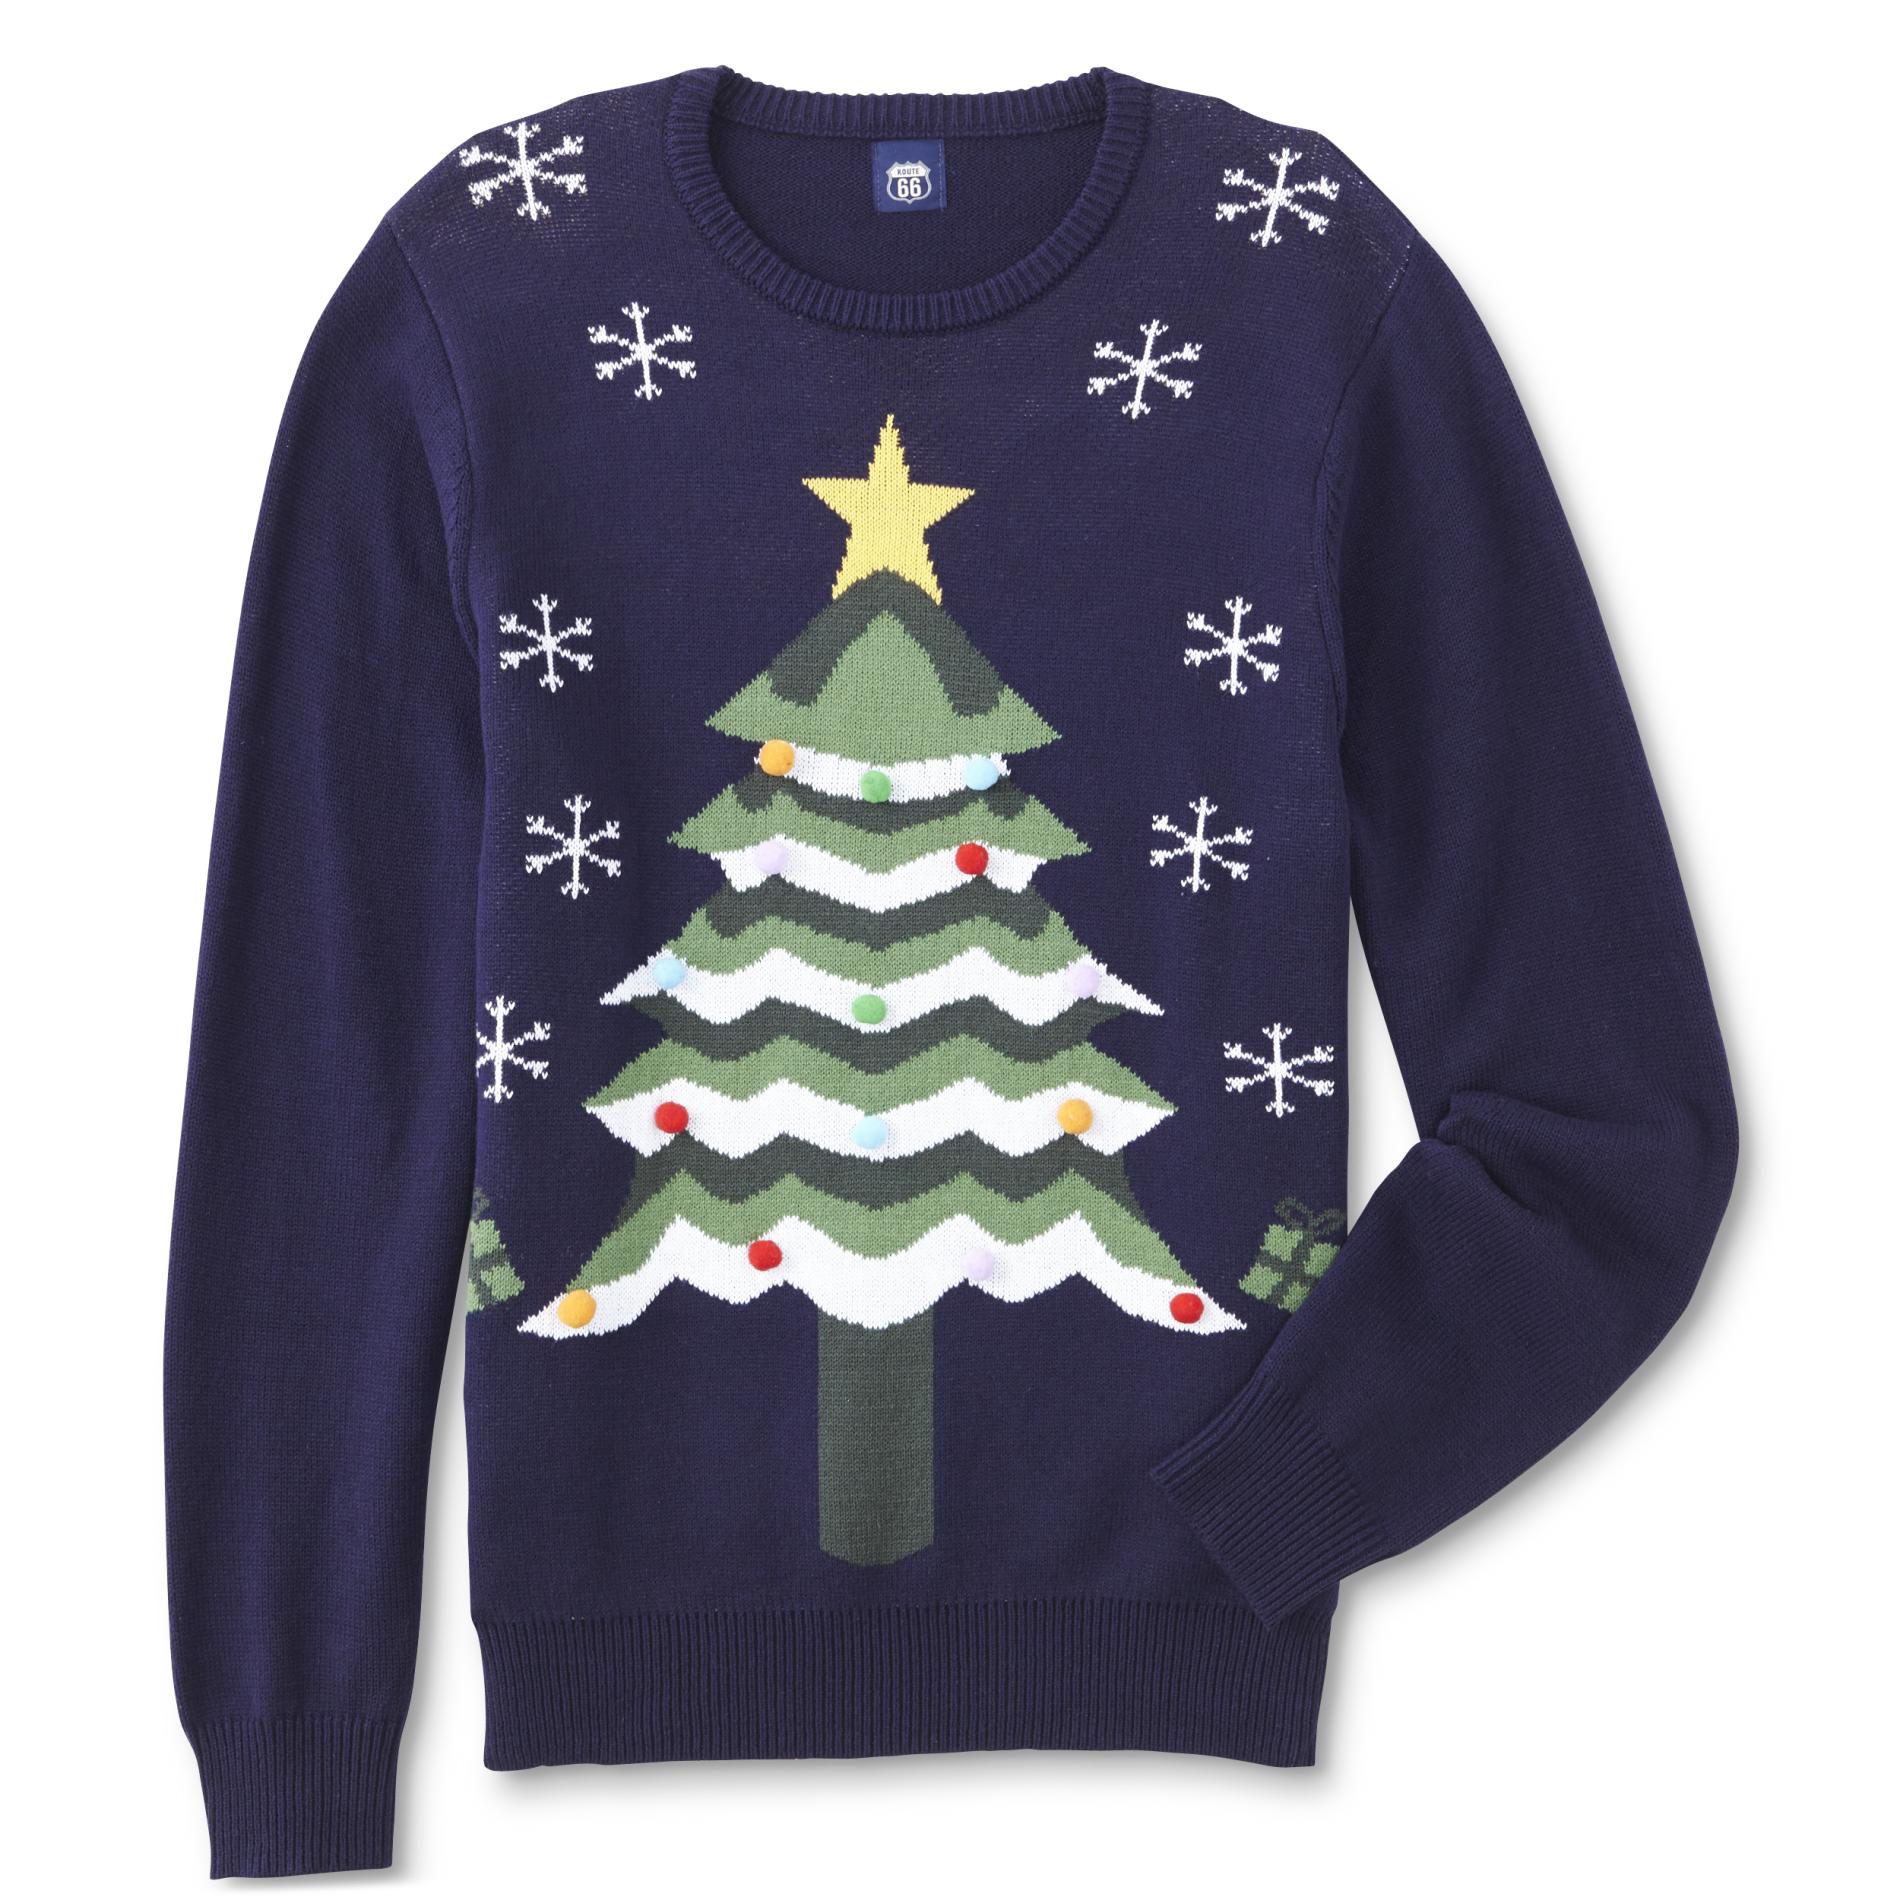 Route 66 Men's Ugly Christmas Sweater - Tree